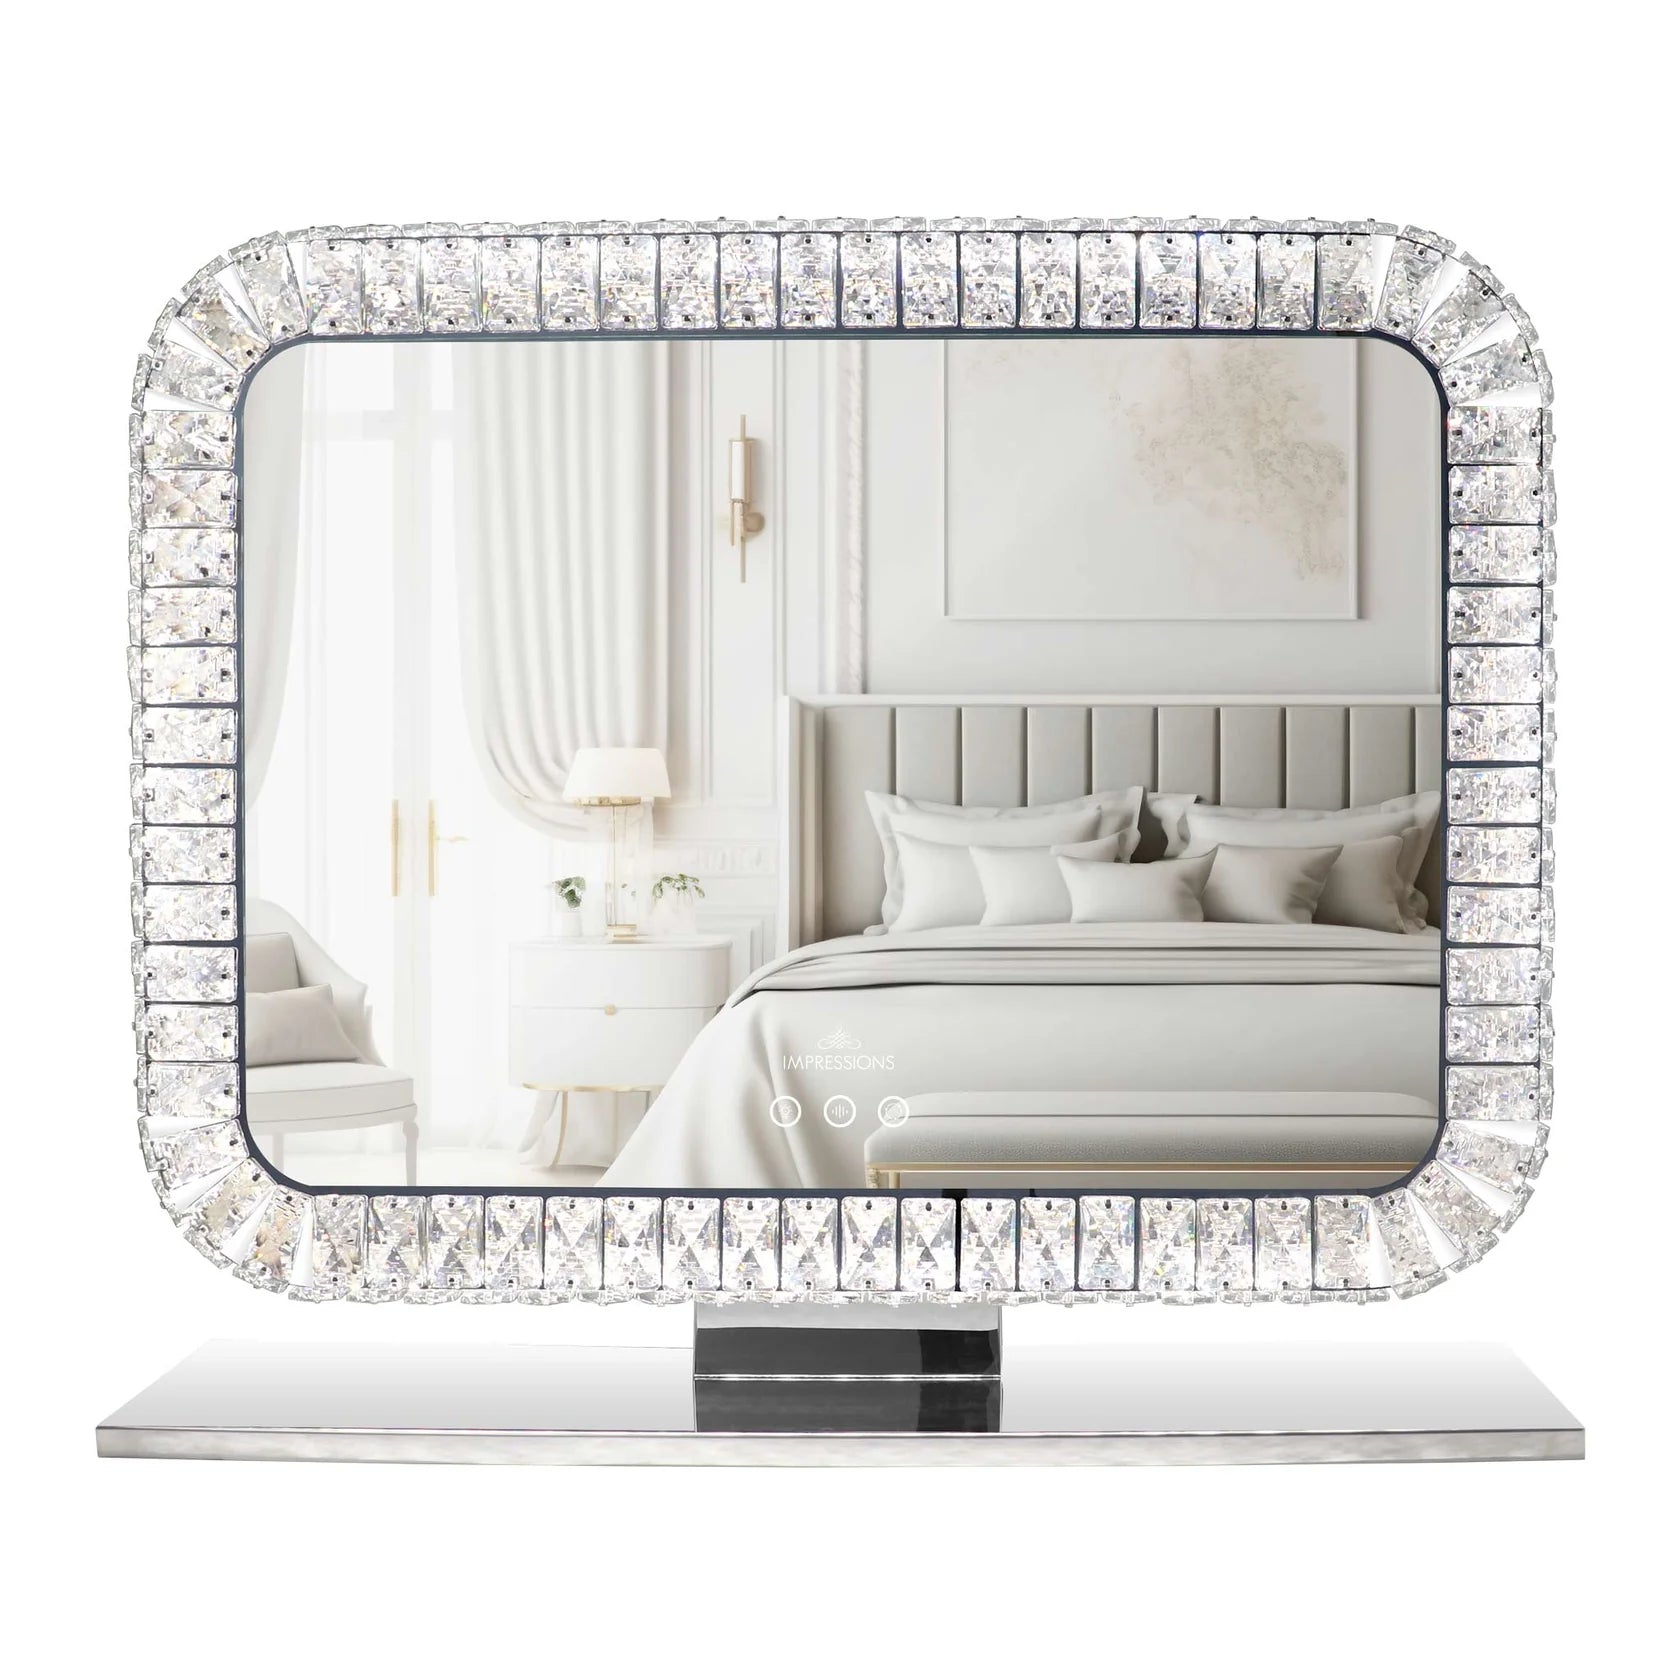 The Bling Collection Landscape RGB Vanity Mirror